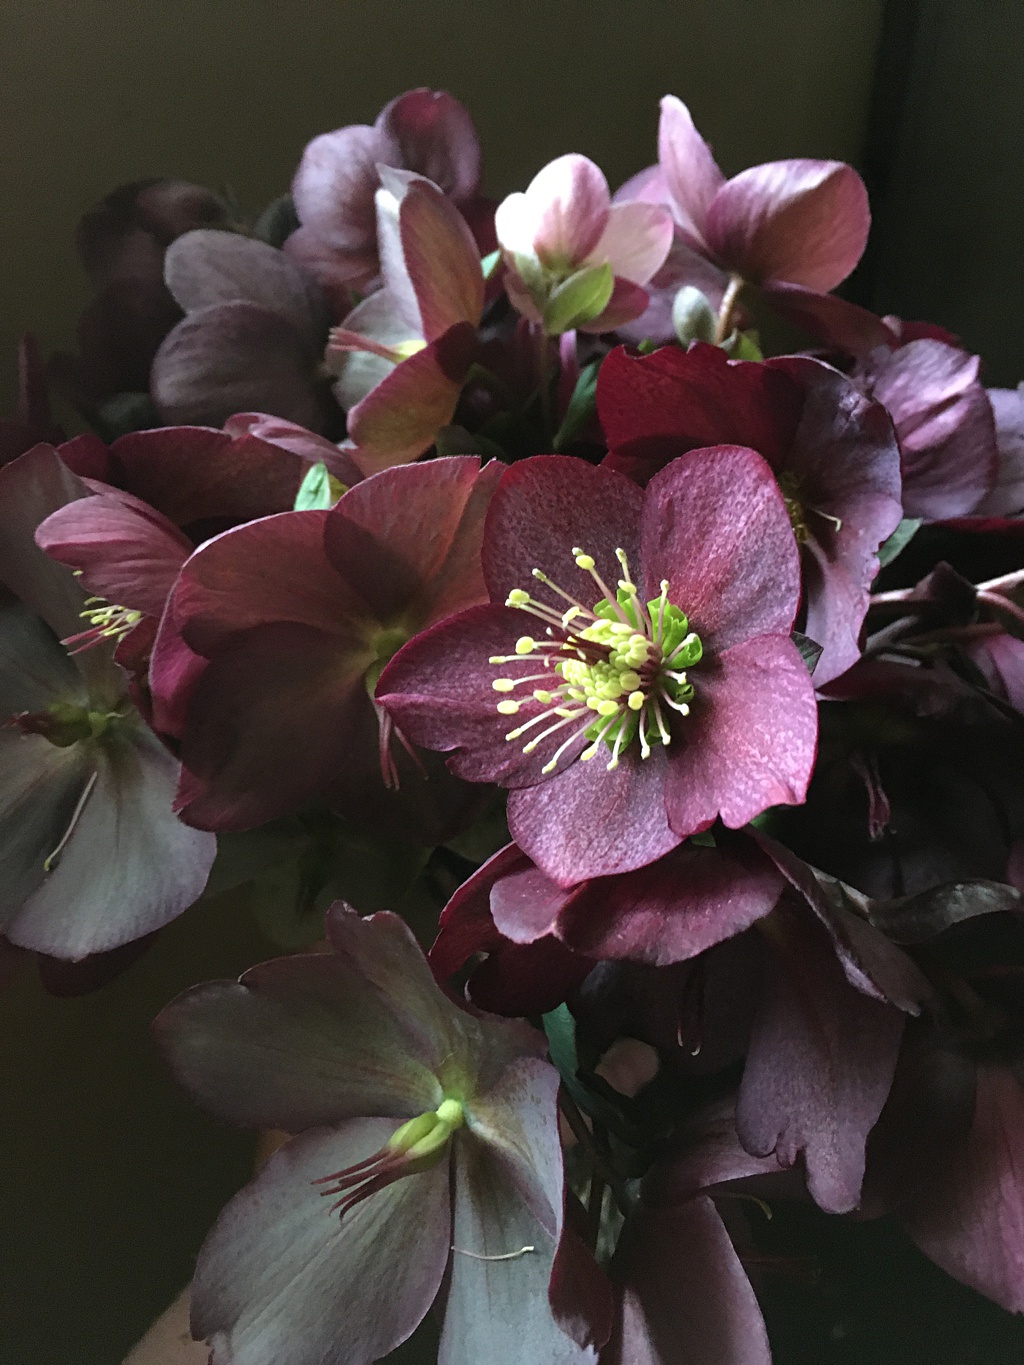 A bunch of red hellebores